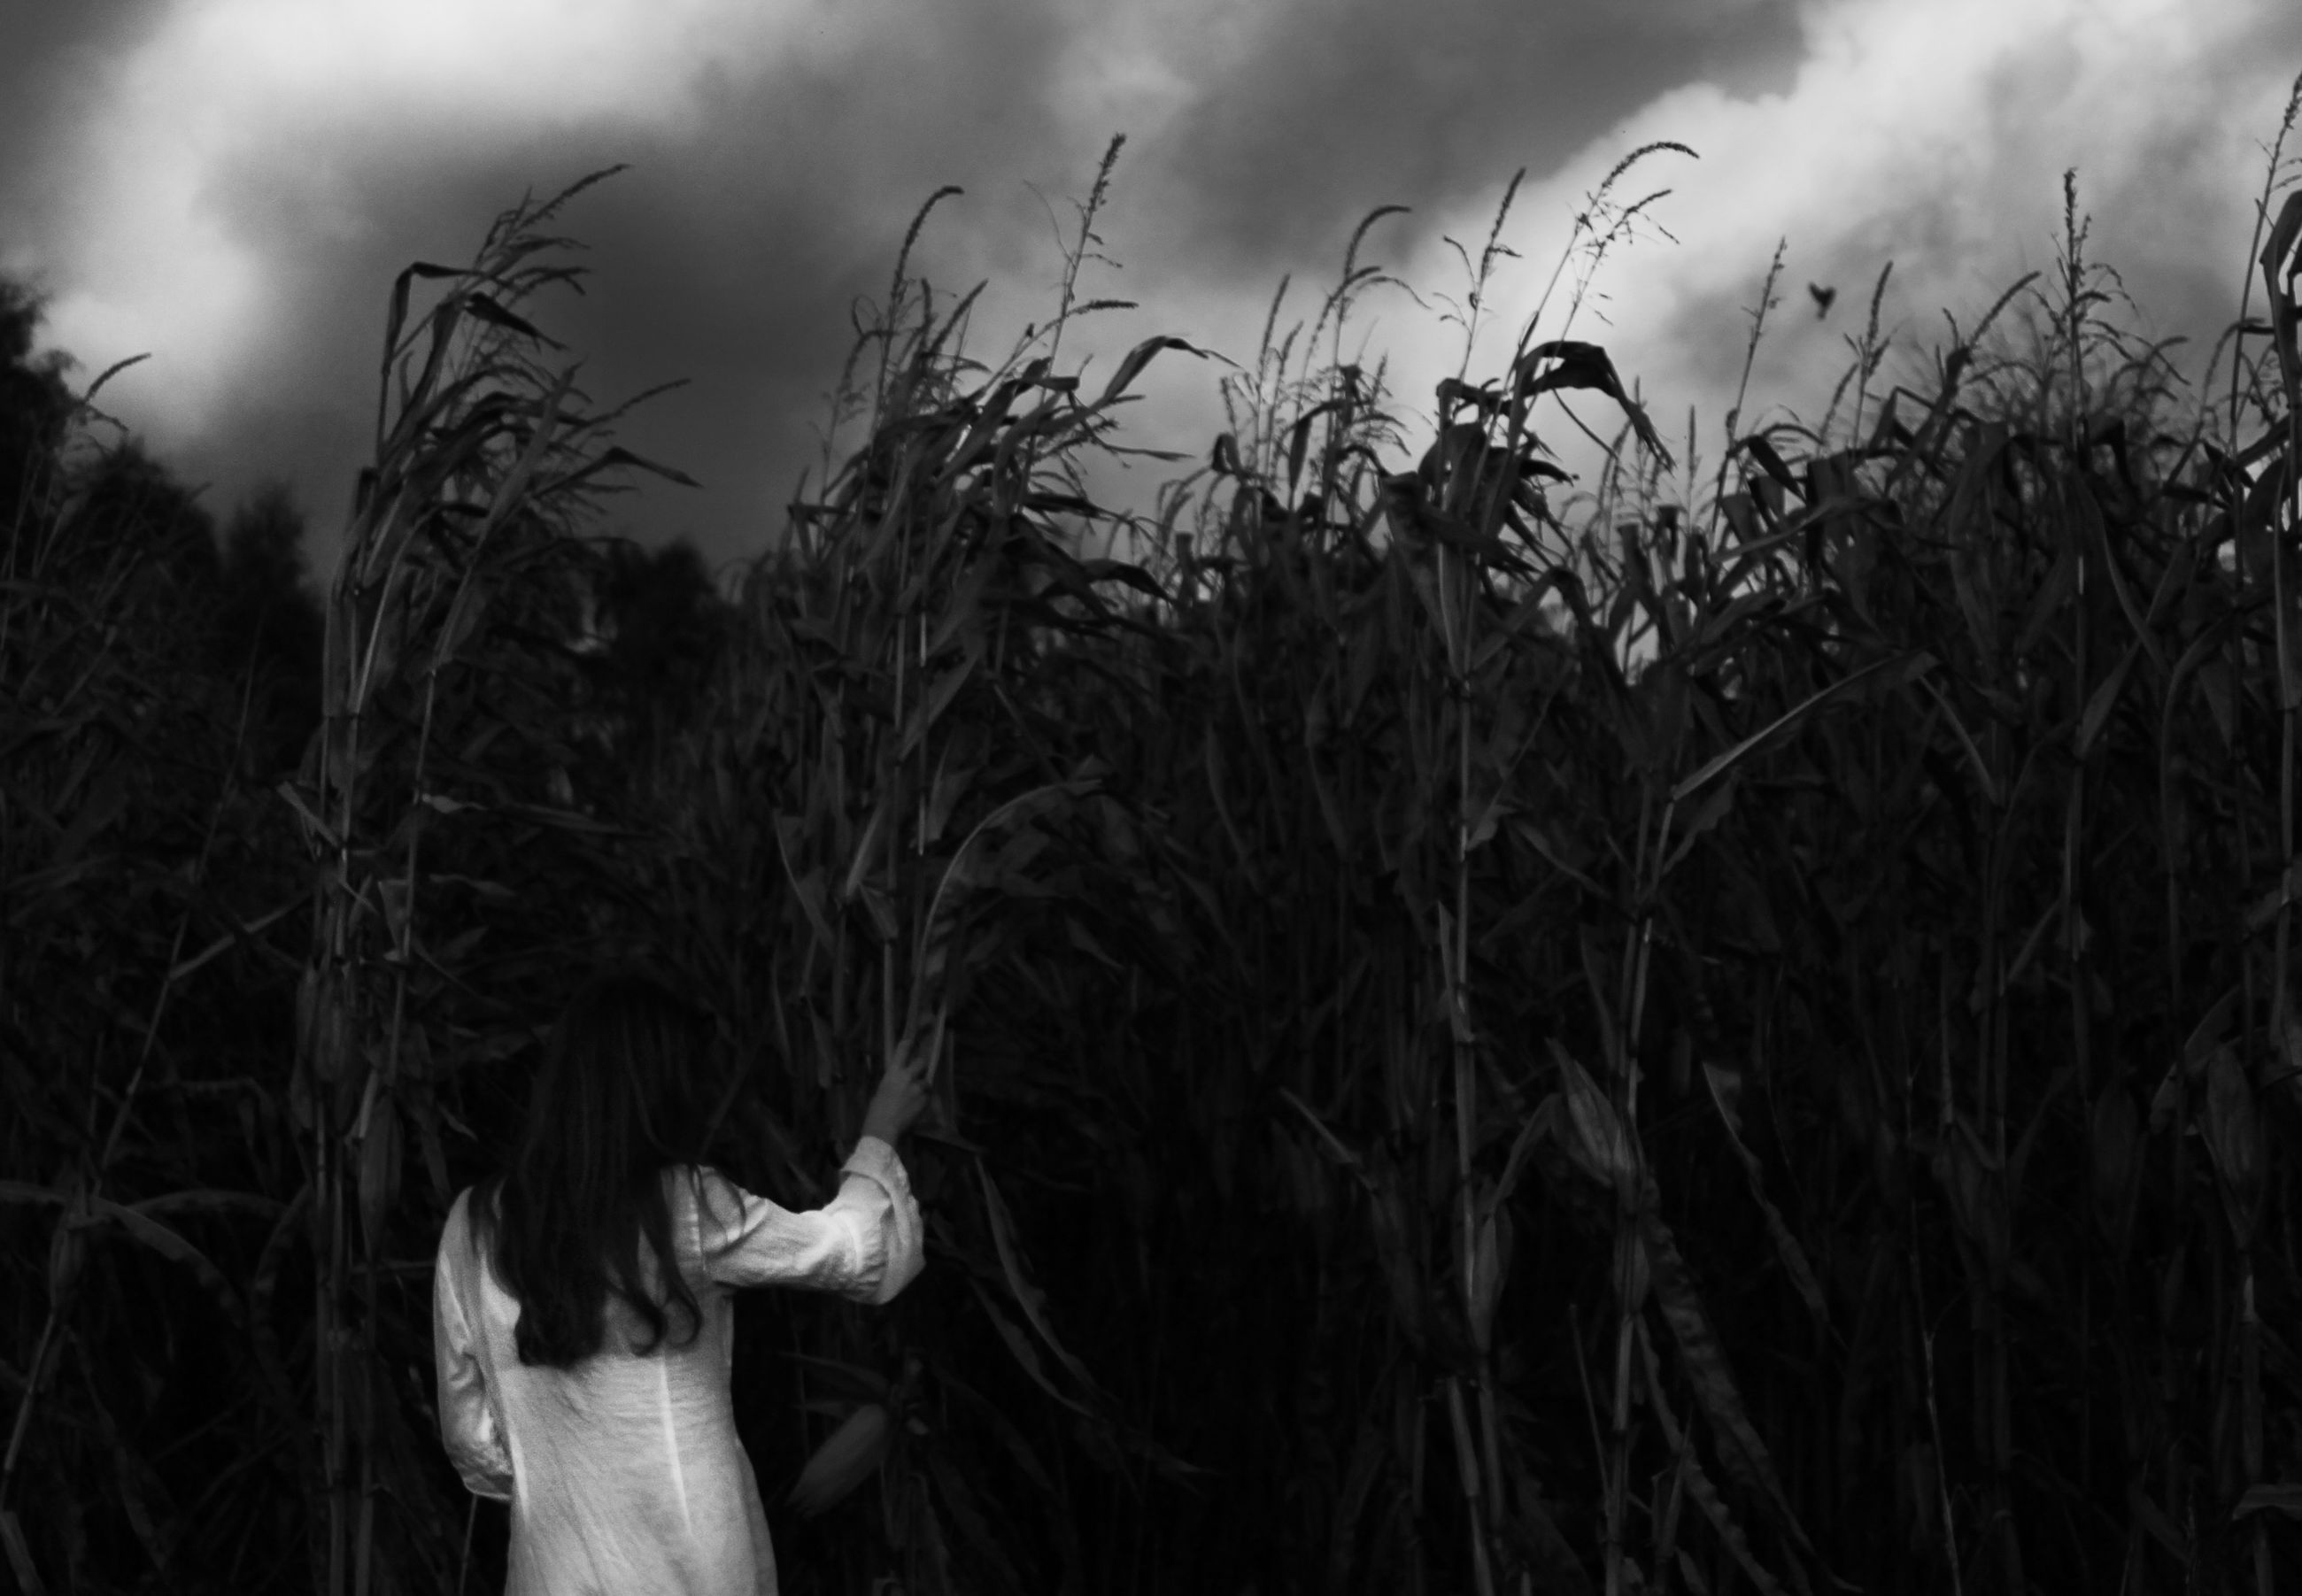 plant, darkness, black and white, nature, sky, land, monochrome photography, monochrome, cloud, field, one person, growth, landscape, crop, adult, cereal plant, rural scene, sunlight, agriculture, outdoors, black, grass, environment, beauty in nature, women